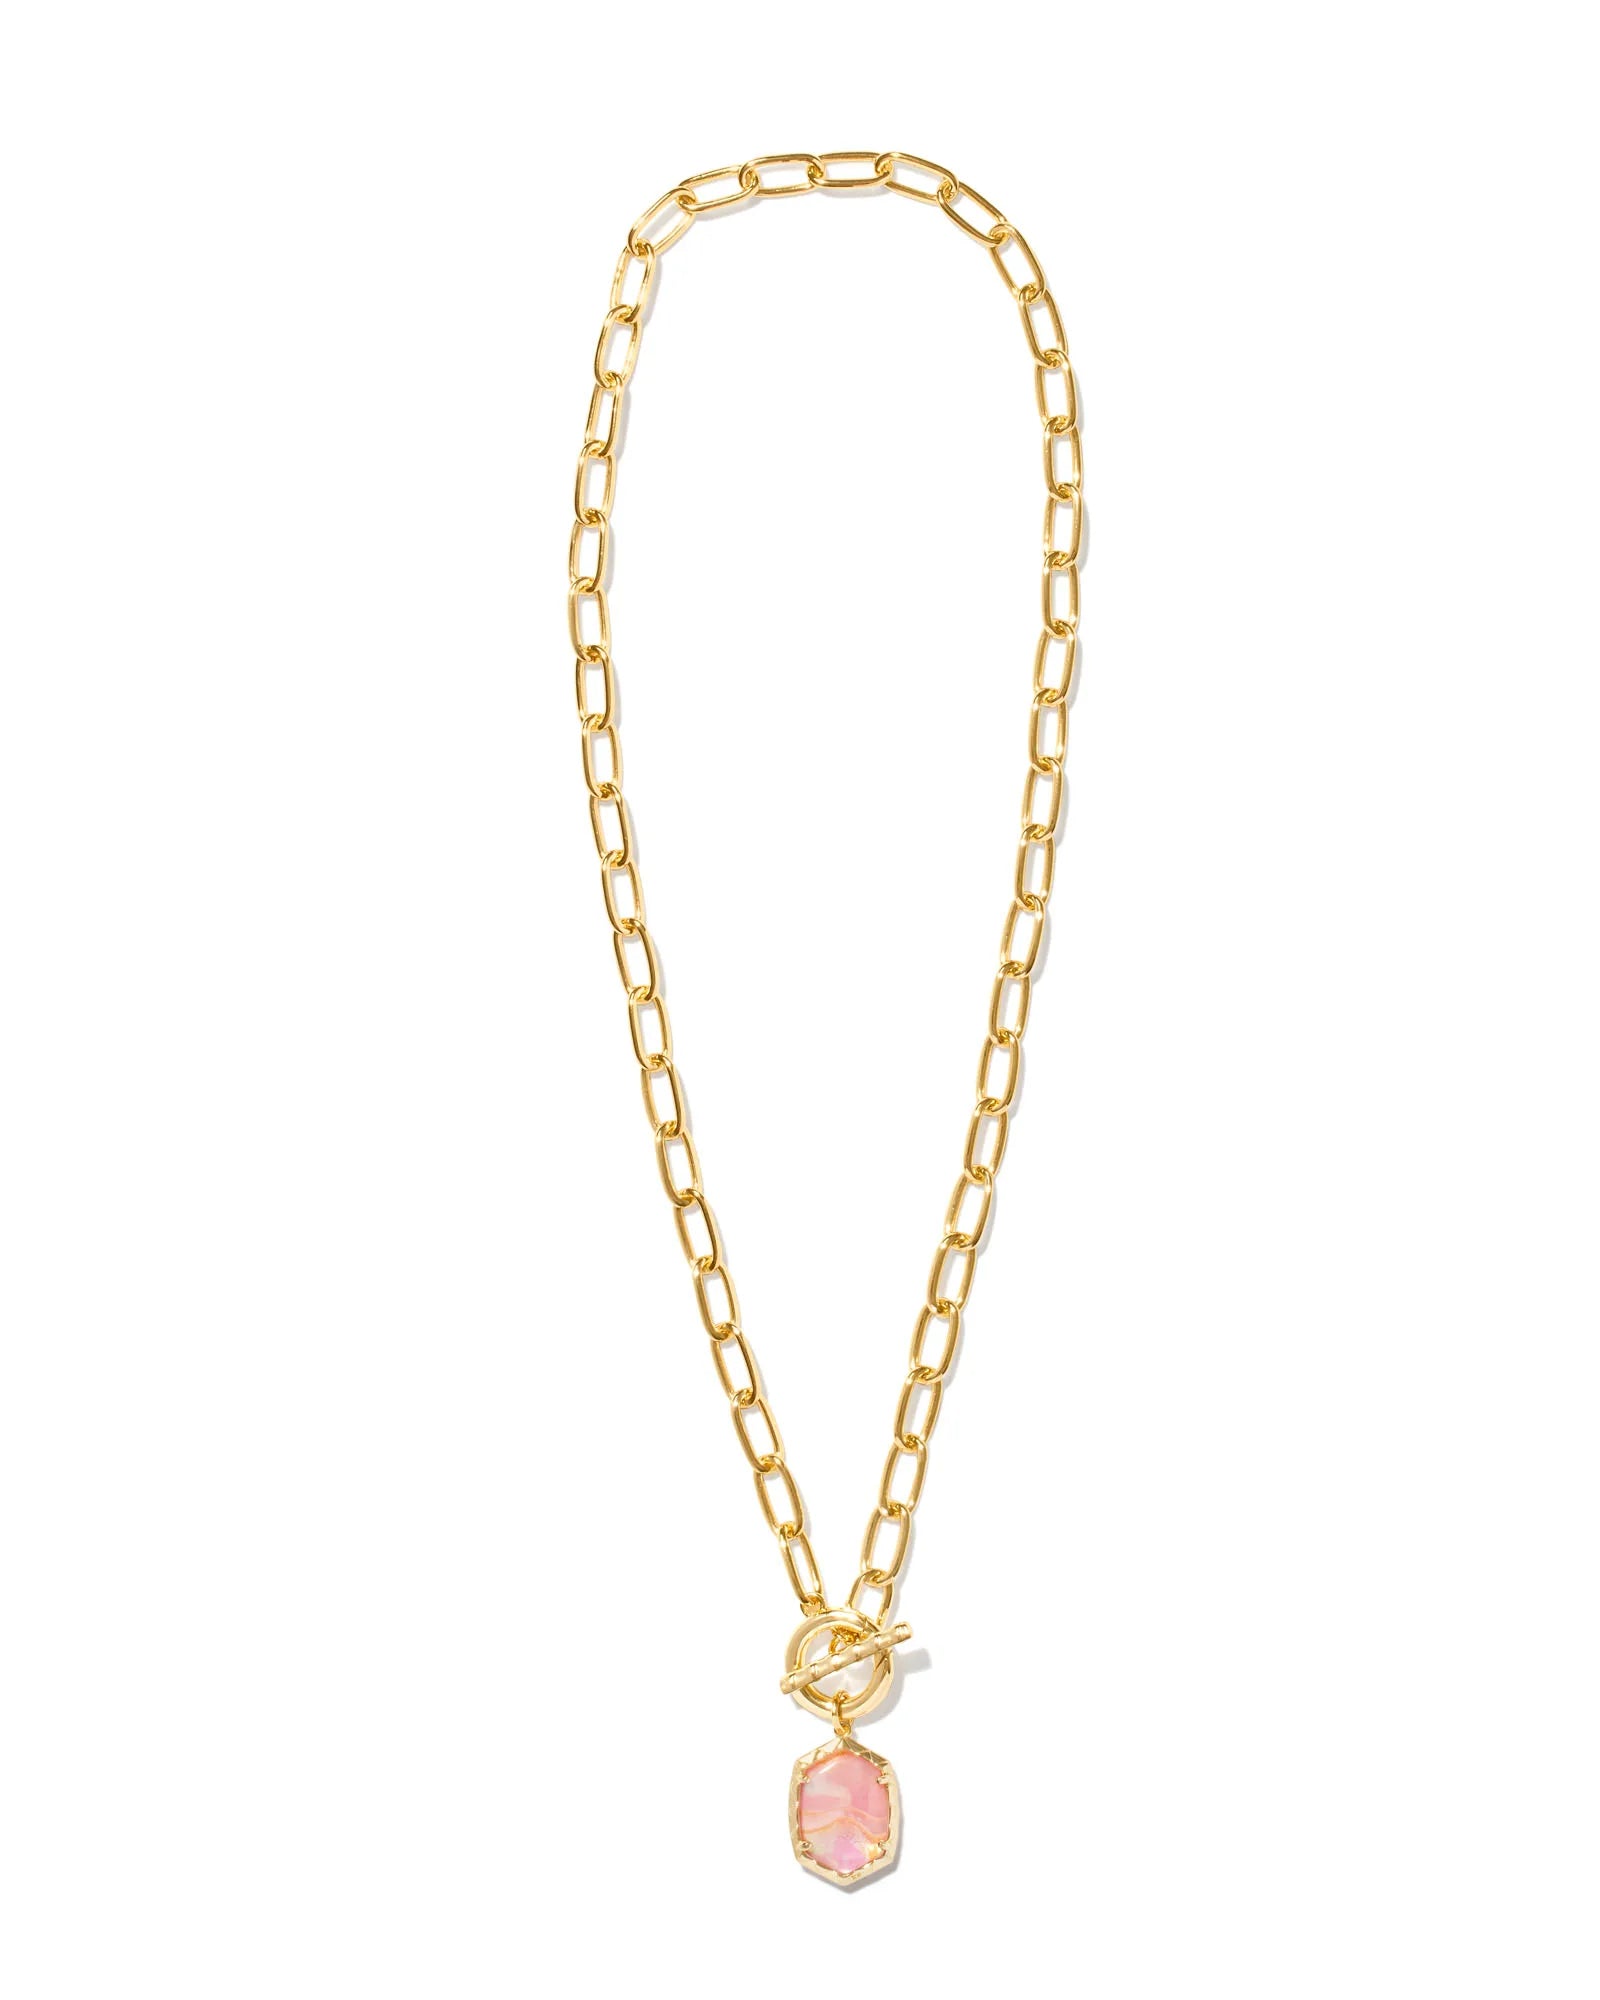 Kendra Scott Daphne Convertible Gold Link and Chain Necklace - Light Pink Iridescent Abalone